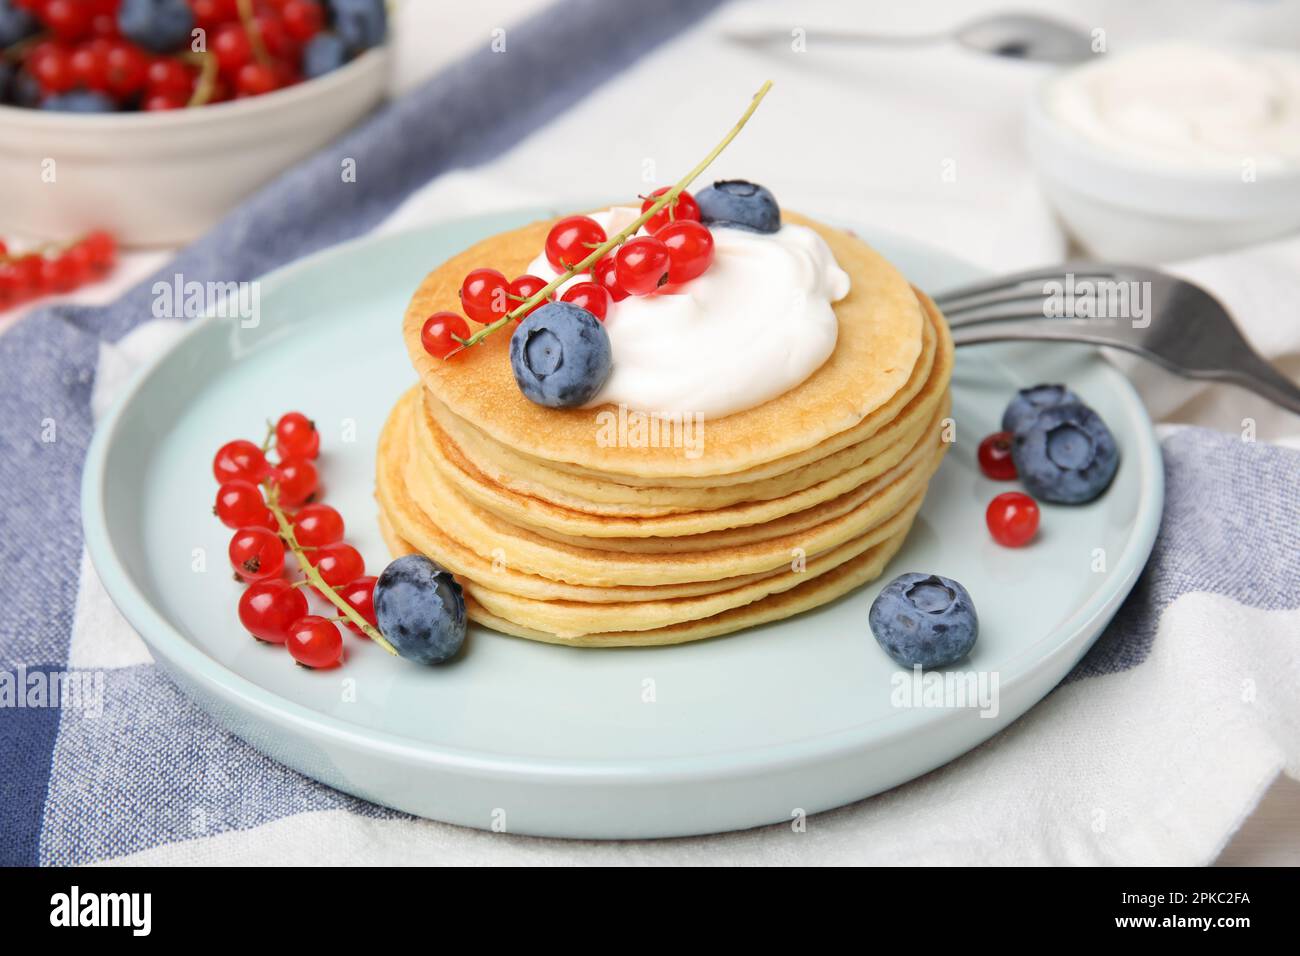 Tasty pancakes with natural yogurt, blueberries and red currants on table Stock Photo